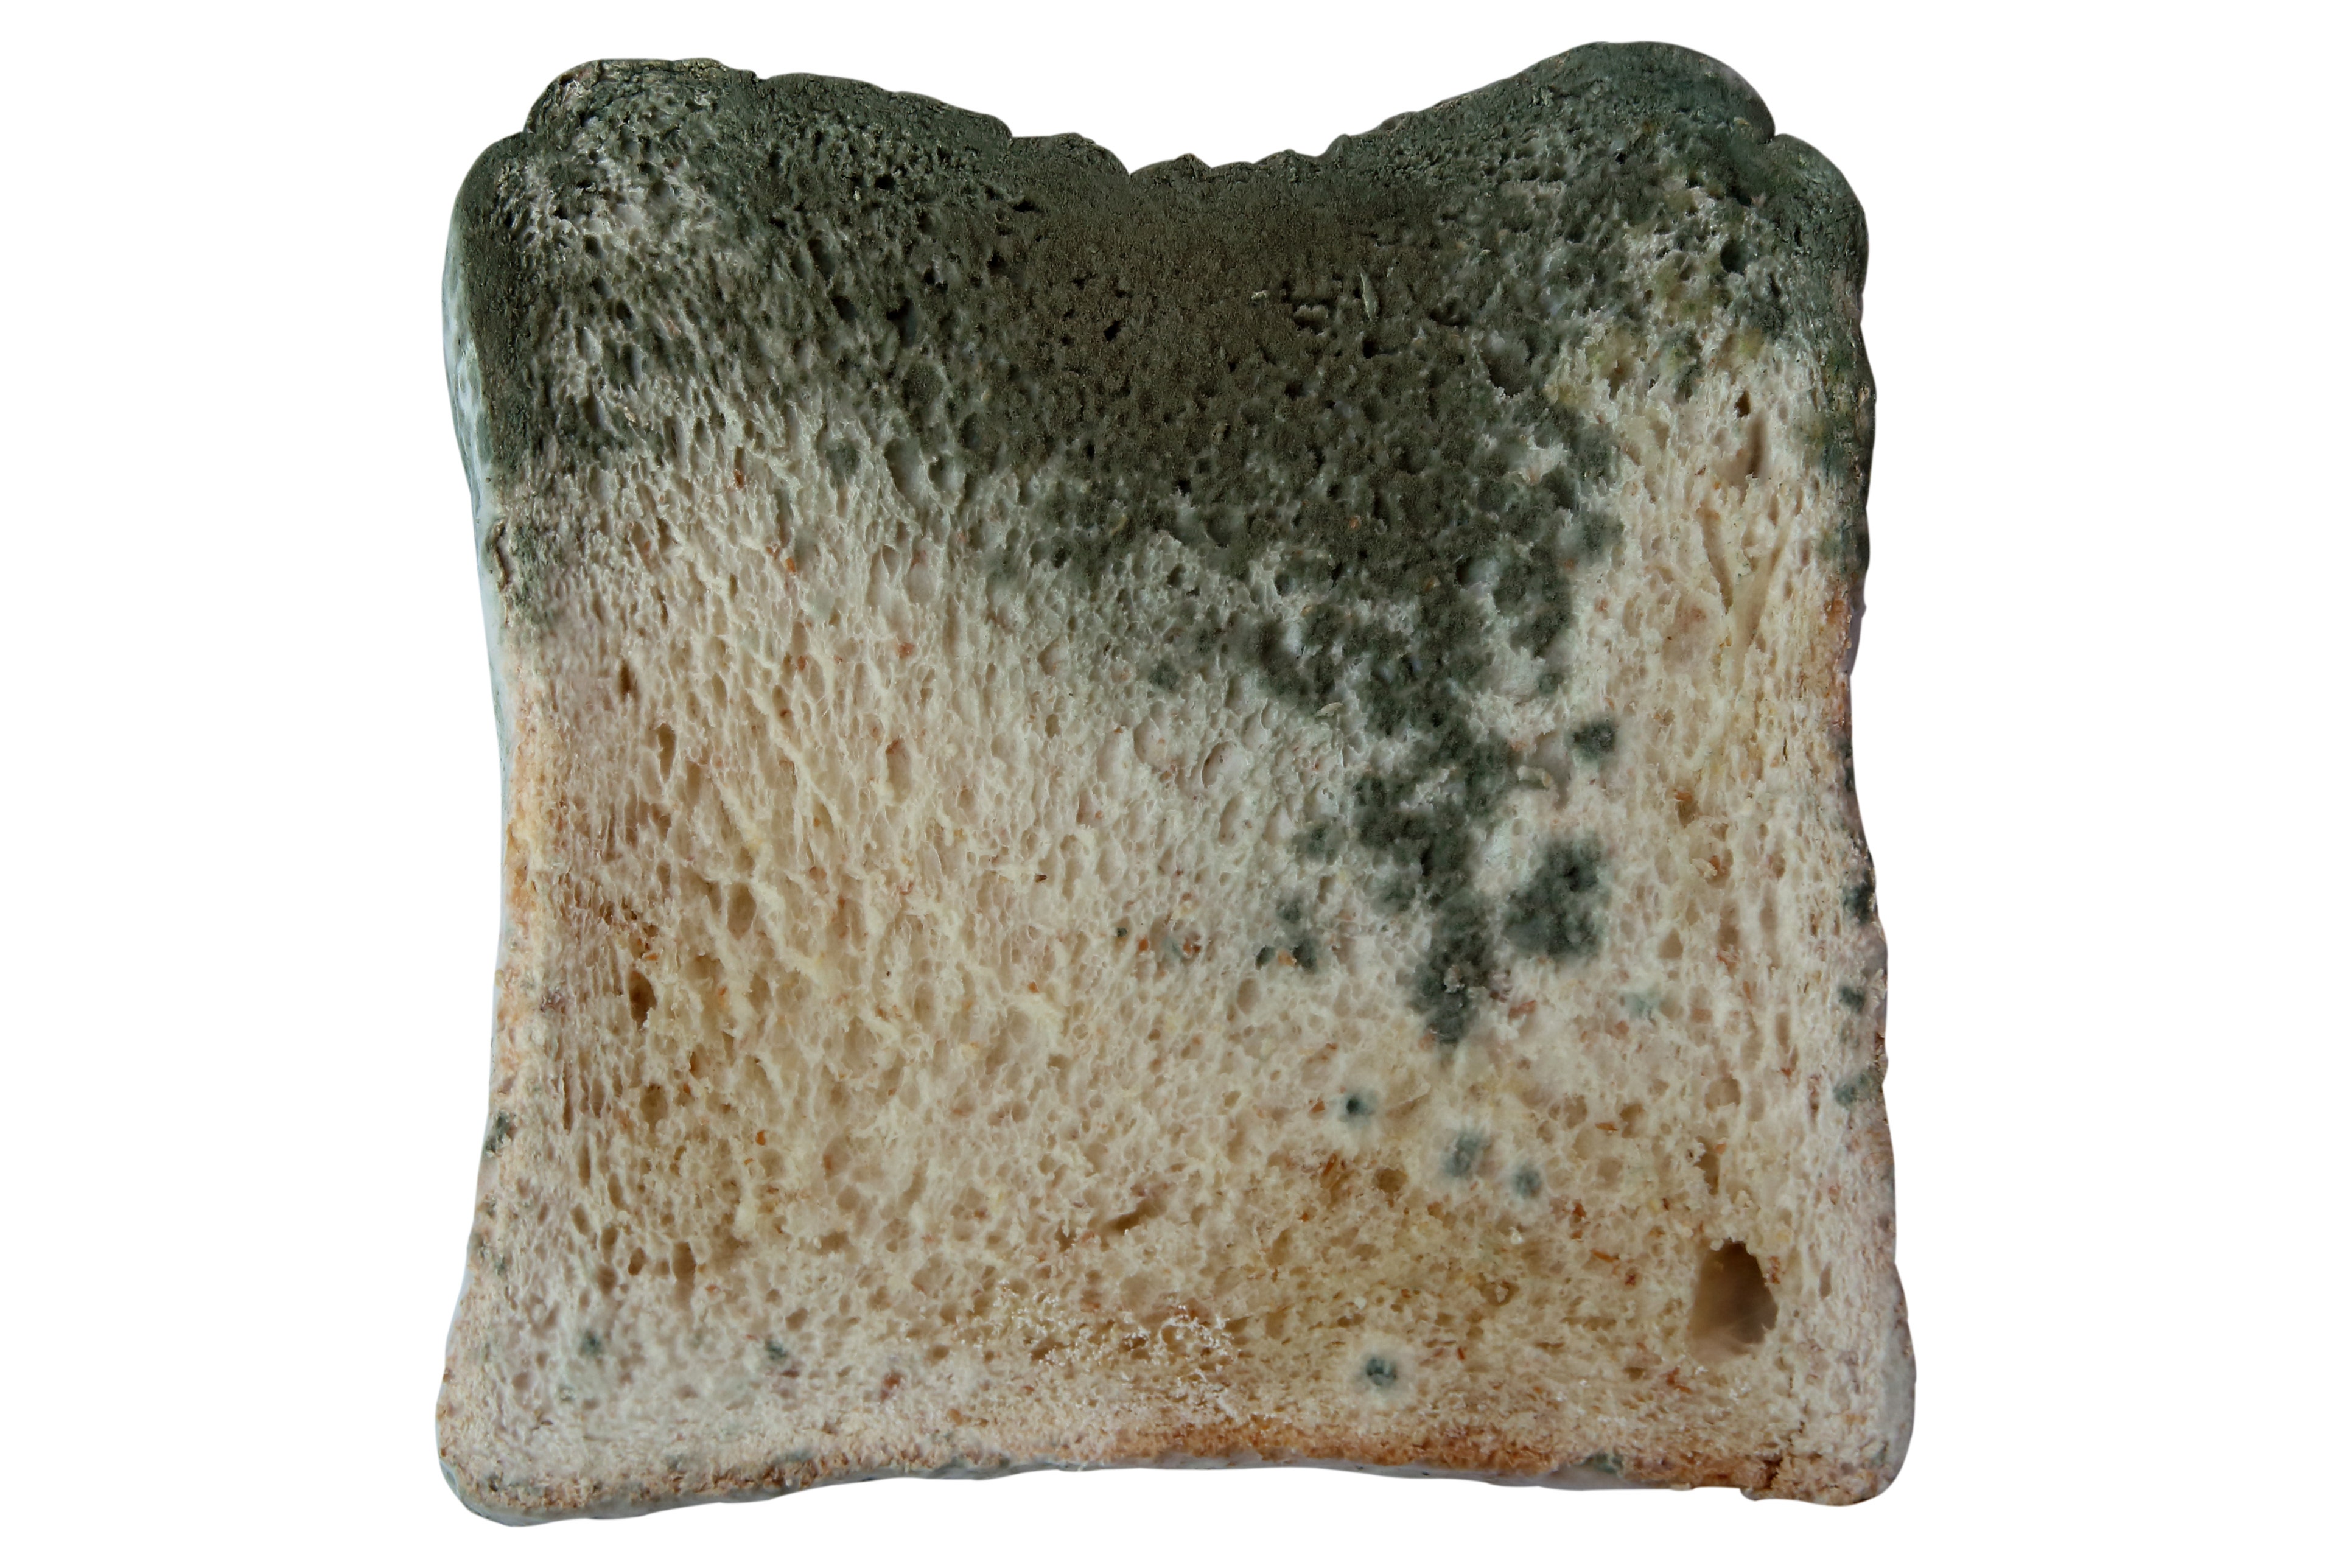 Moldy Bread by Photo Researchers